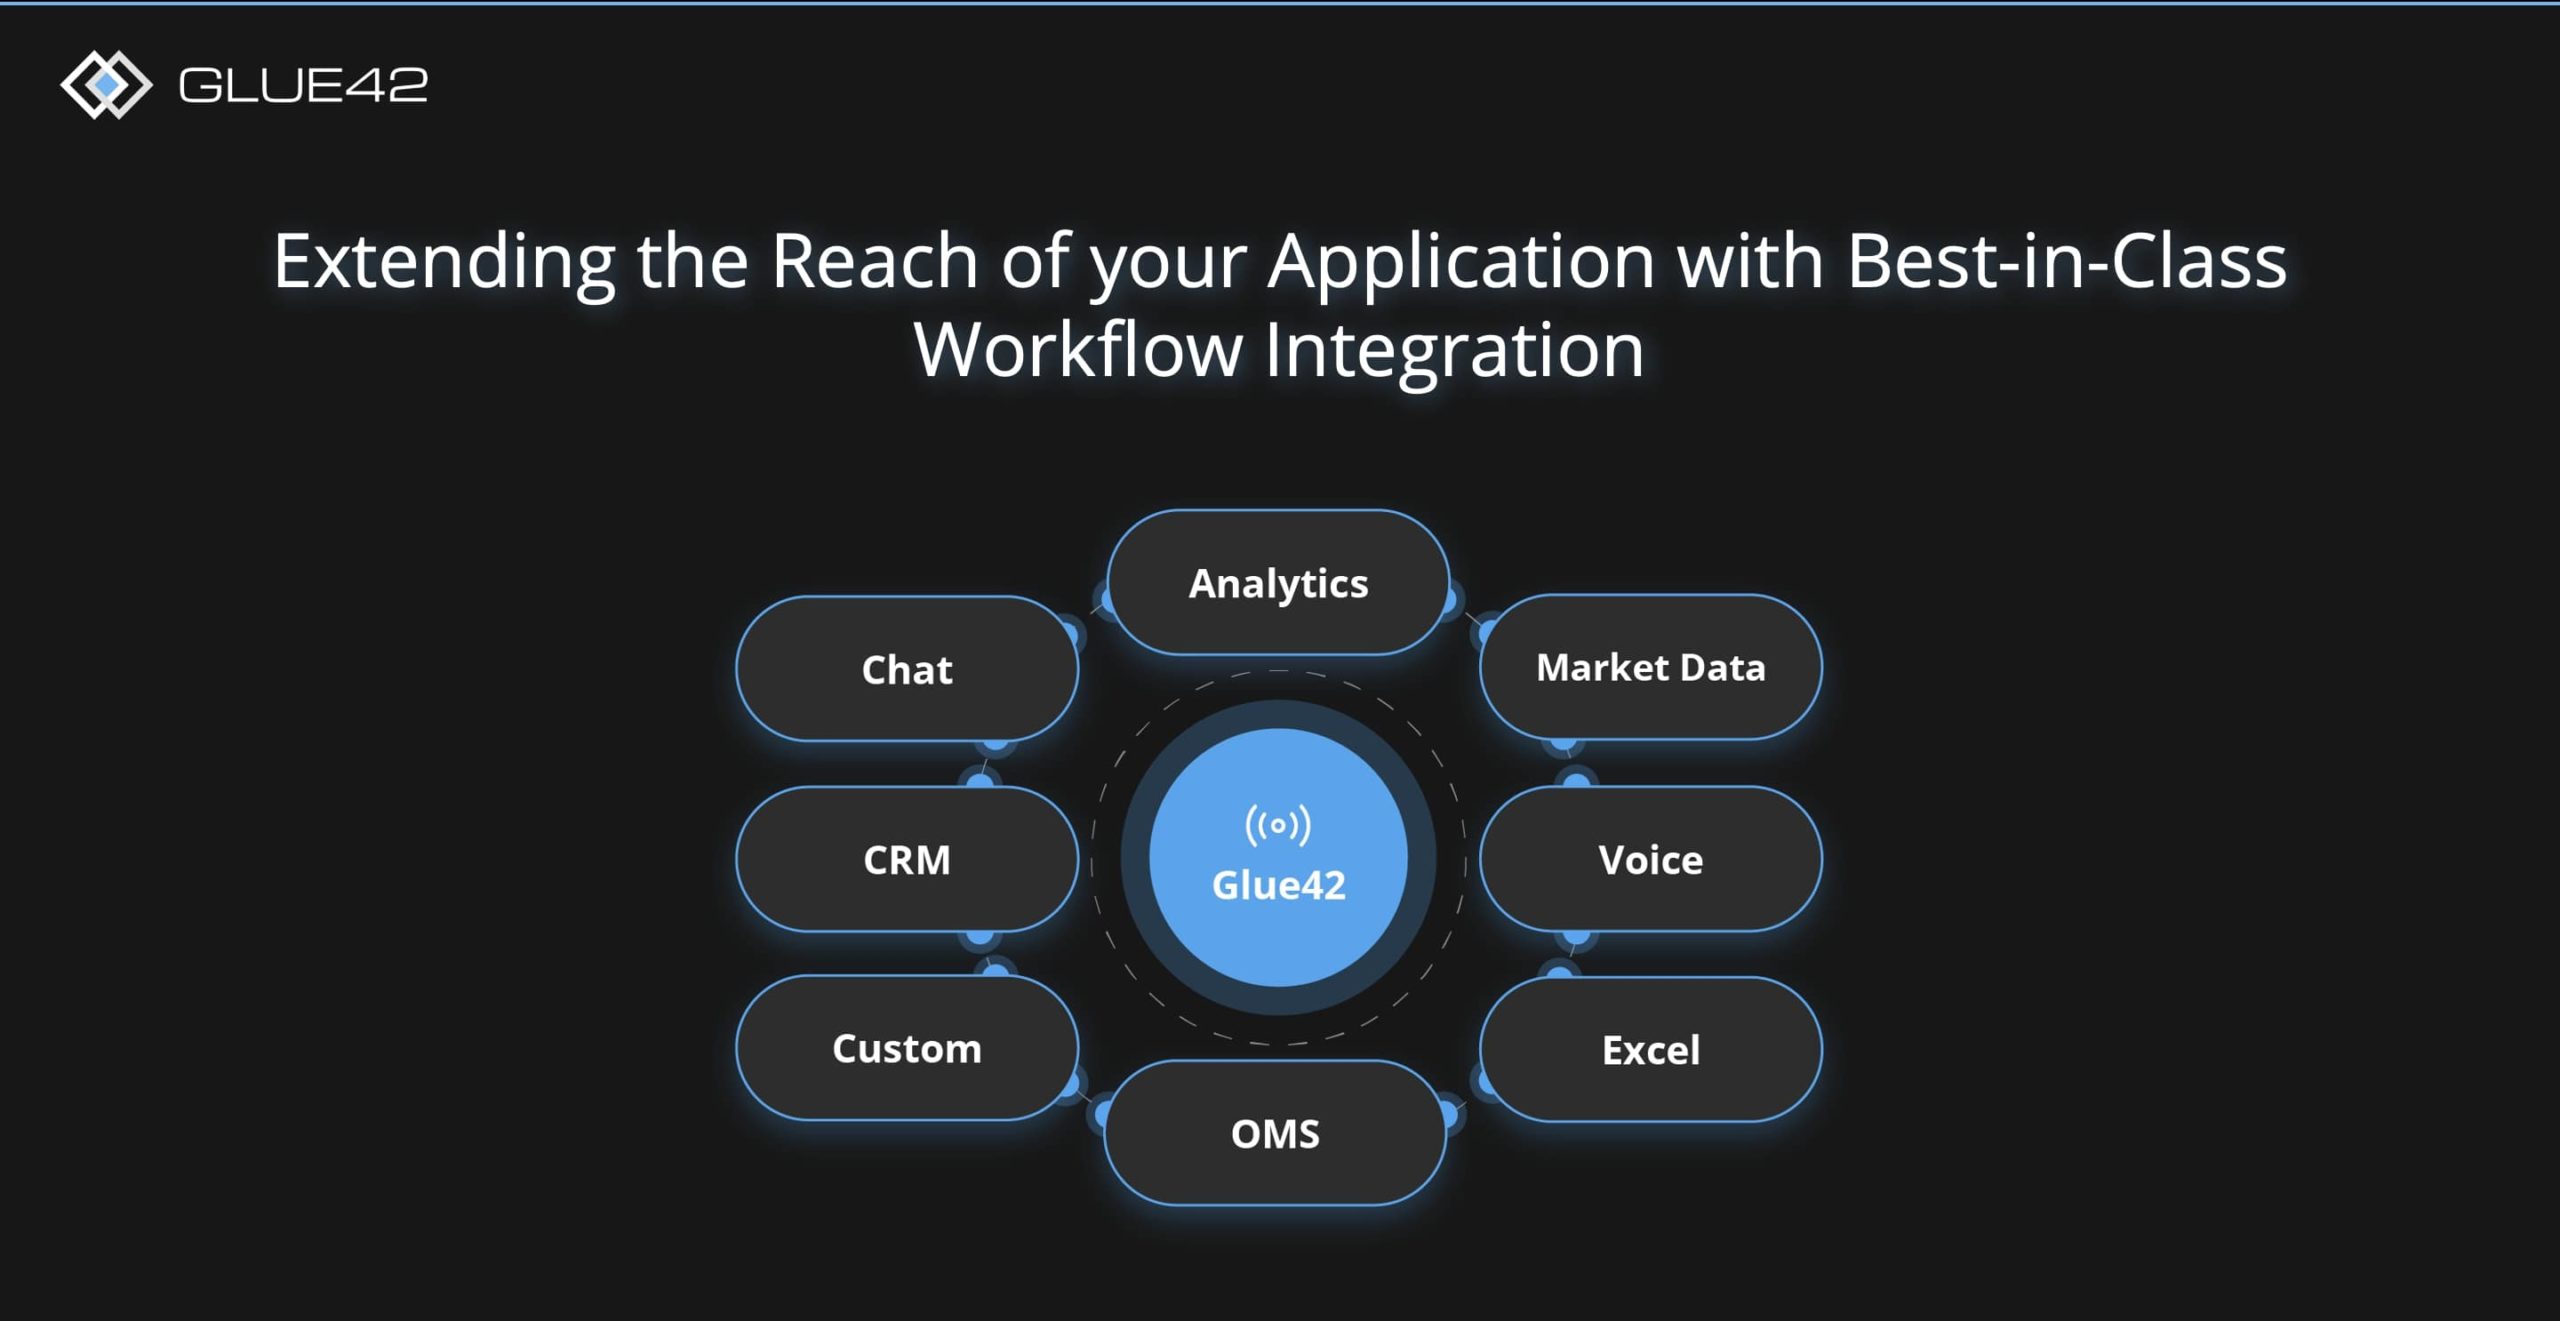 Extending the reach of your application with better workflow integration